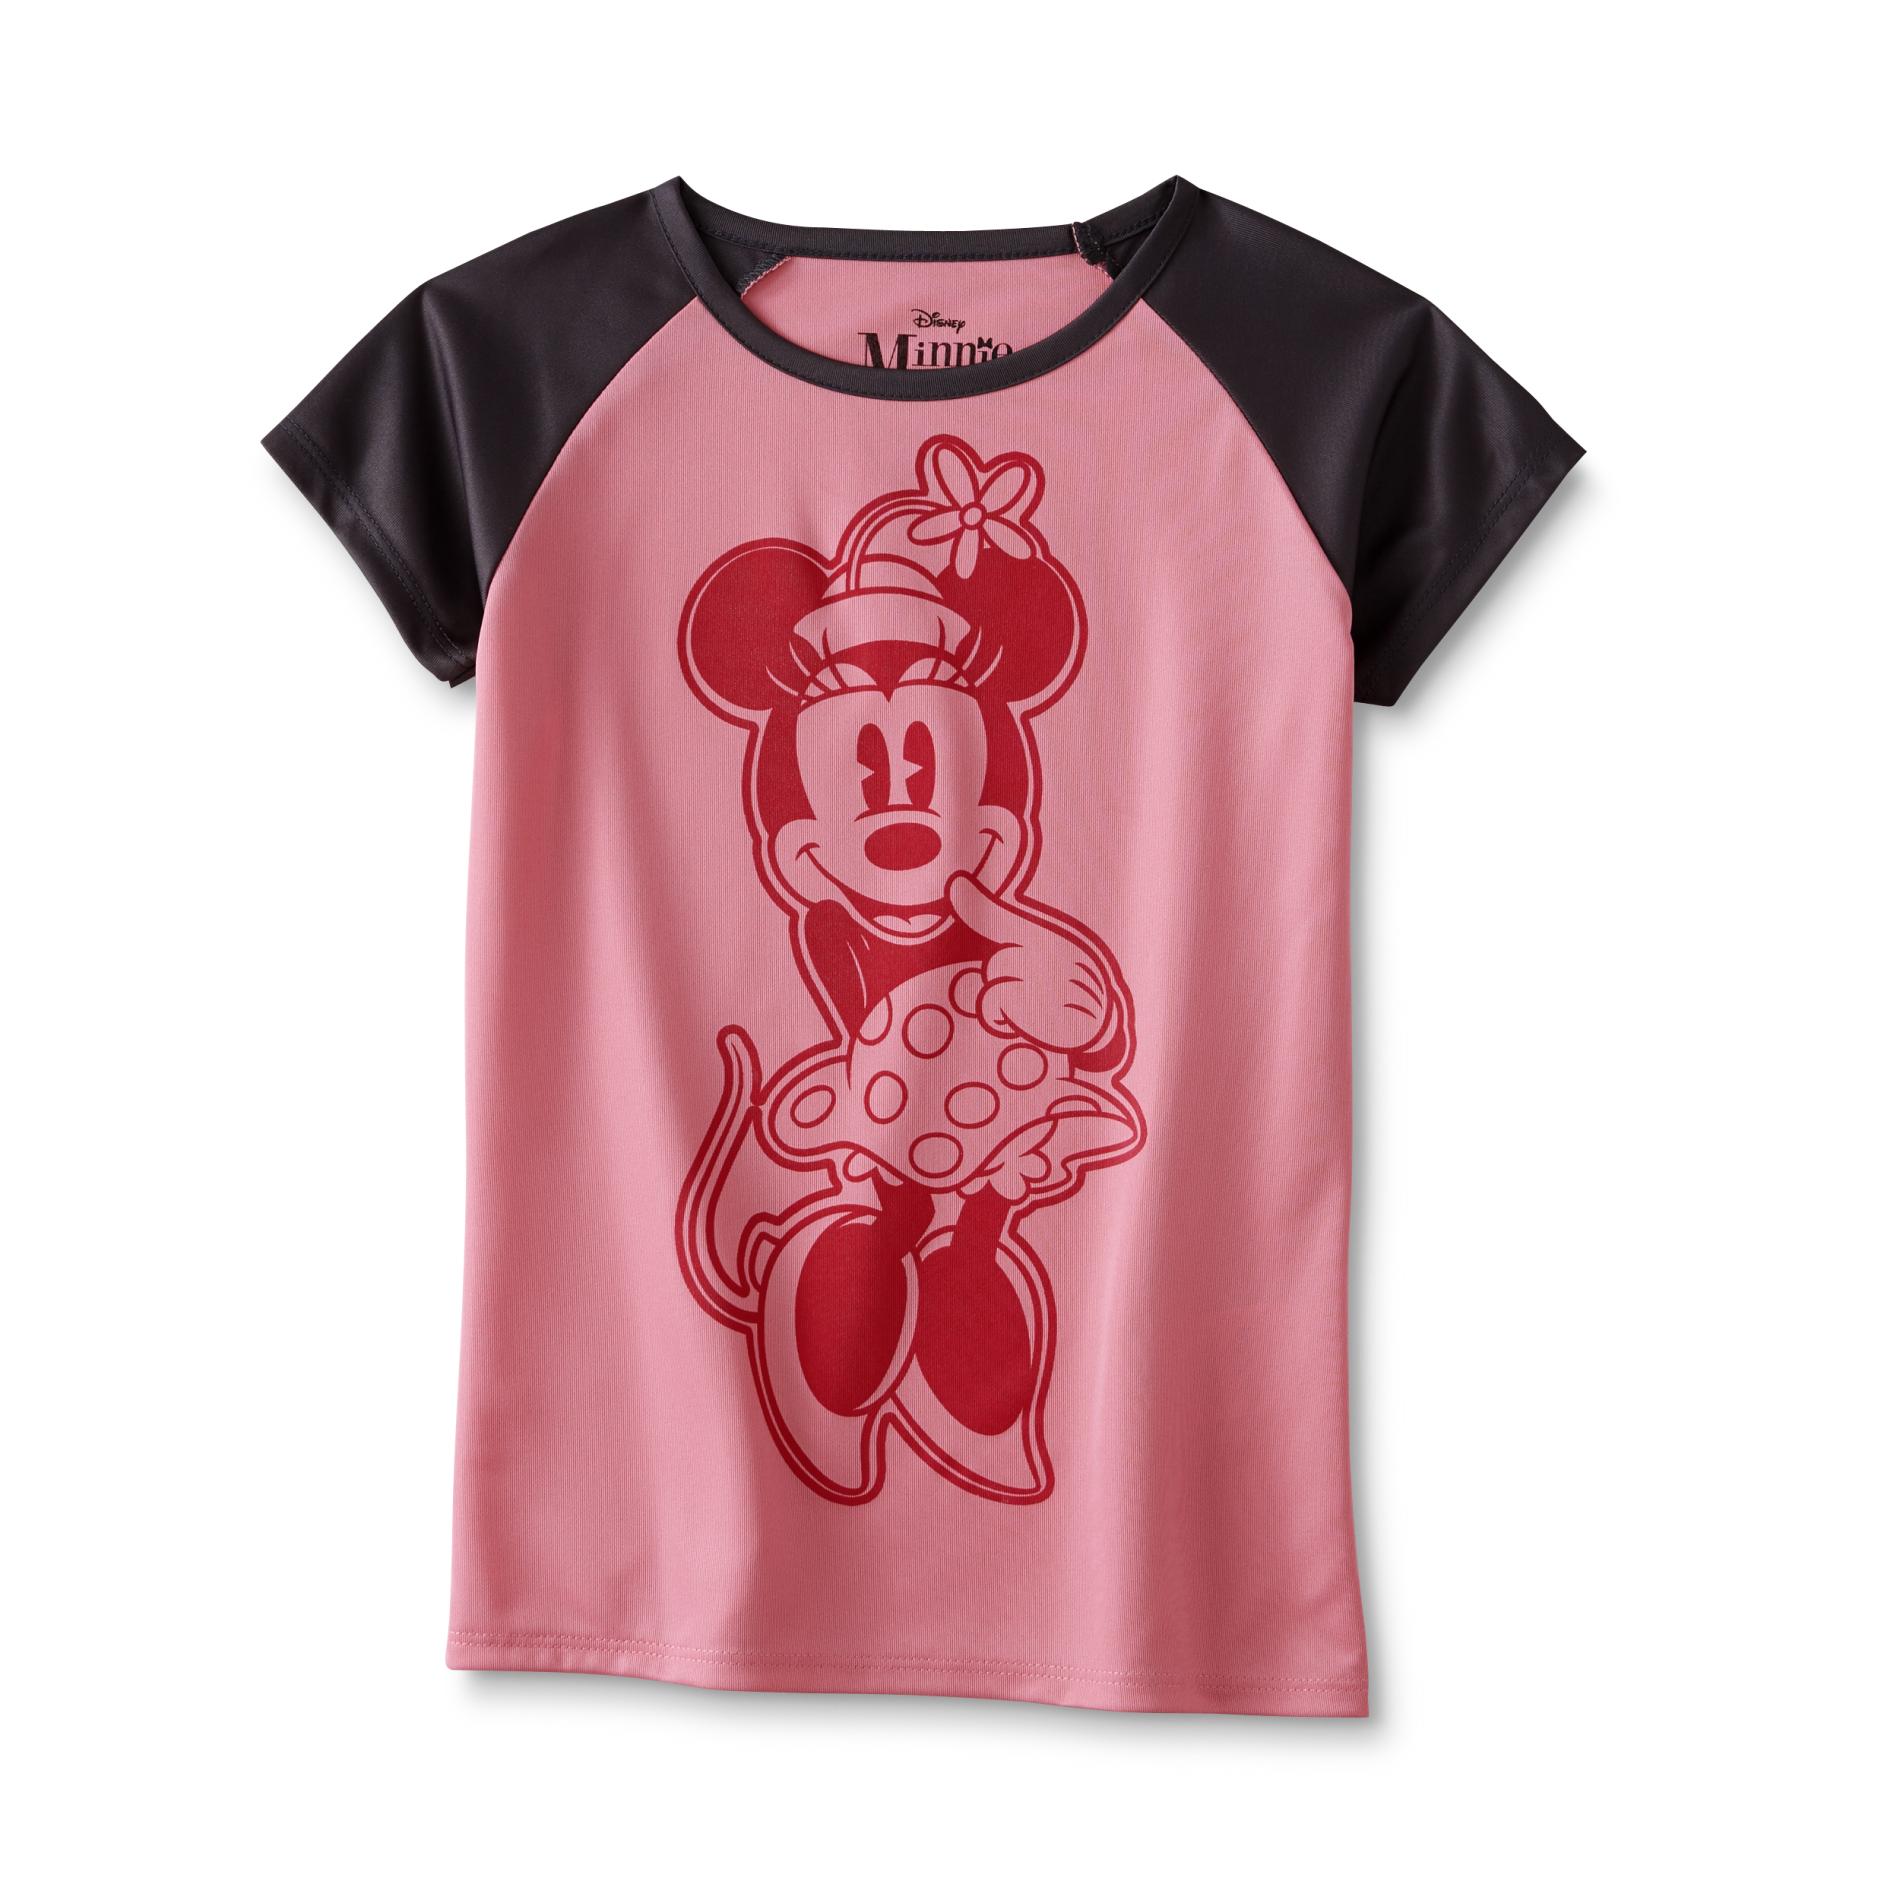 Disney Minnie Mouse Girl's Graphic Athletic T-Shirt